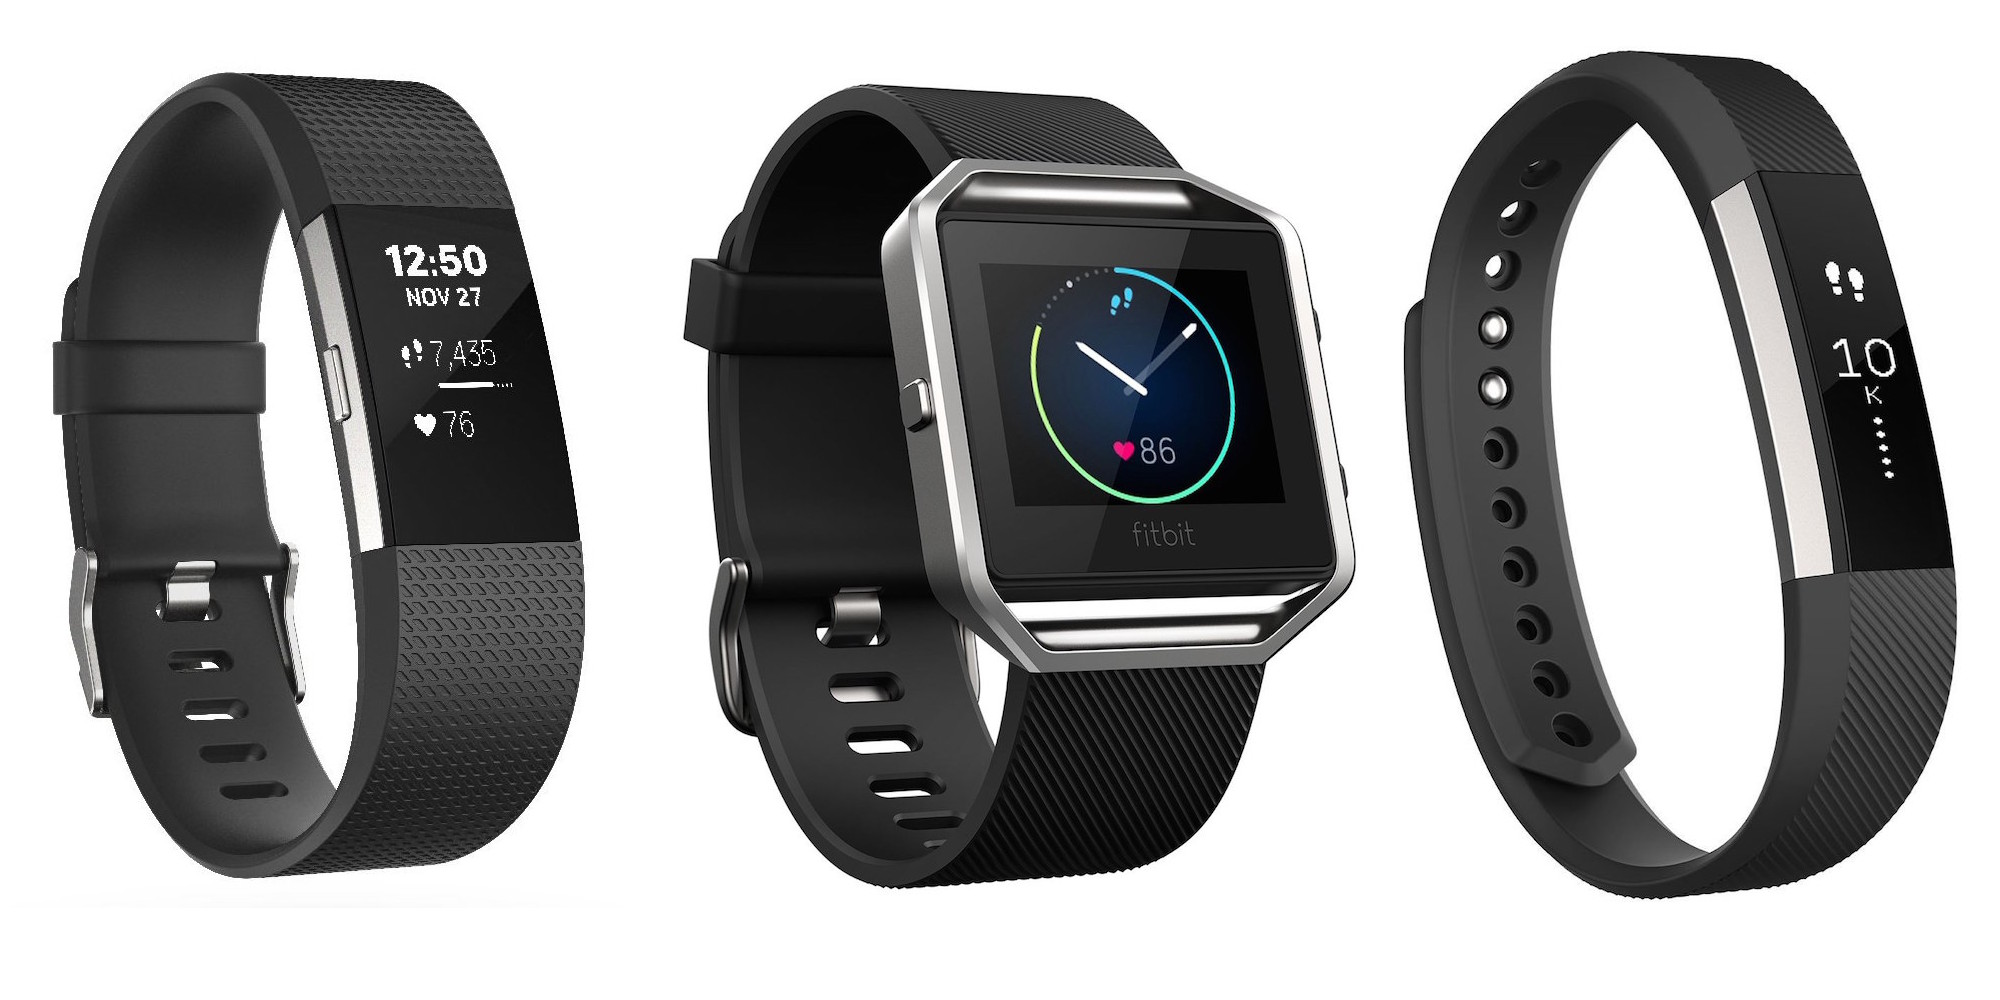 Fitbit fitness trackers up 40% off: 2 $60, Alta $100, Charge 2 $130,